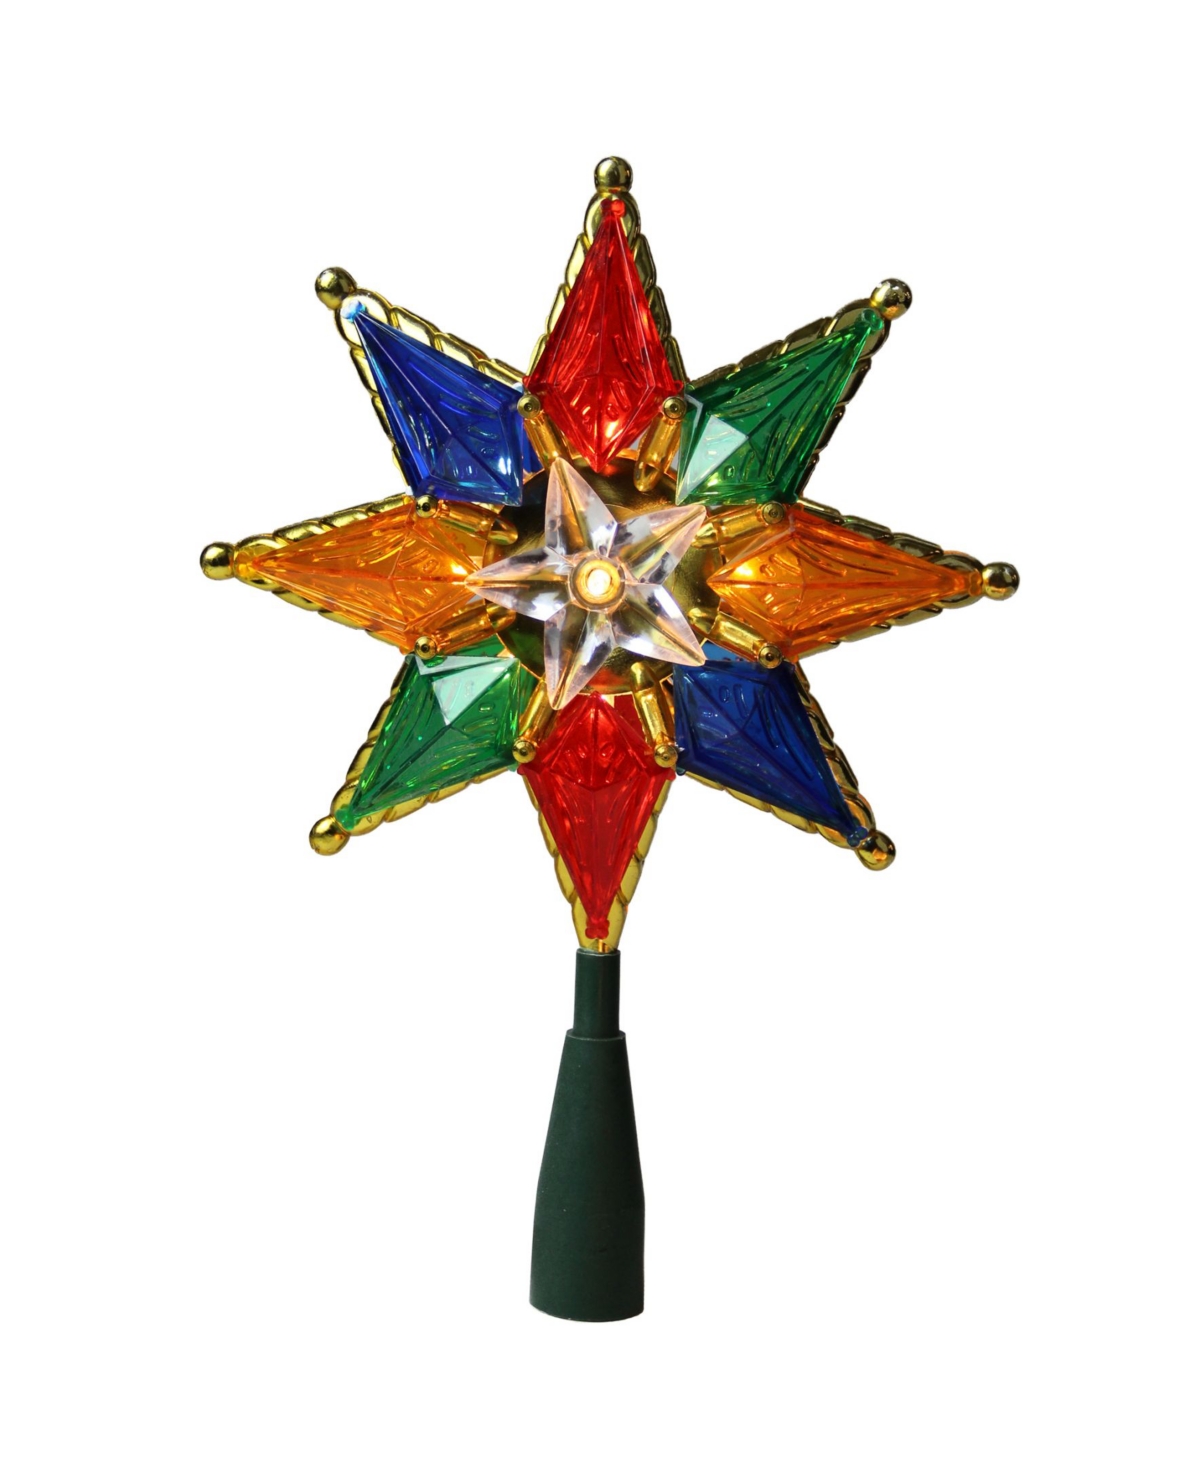 8" Multi-Color Mosaic 8-Point Star Christmas Tree Topper - Clear Lights - Multi